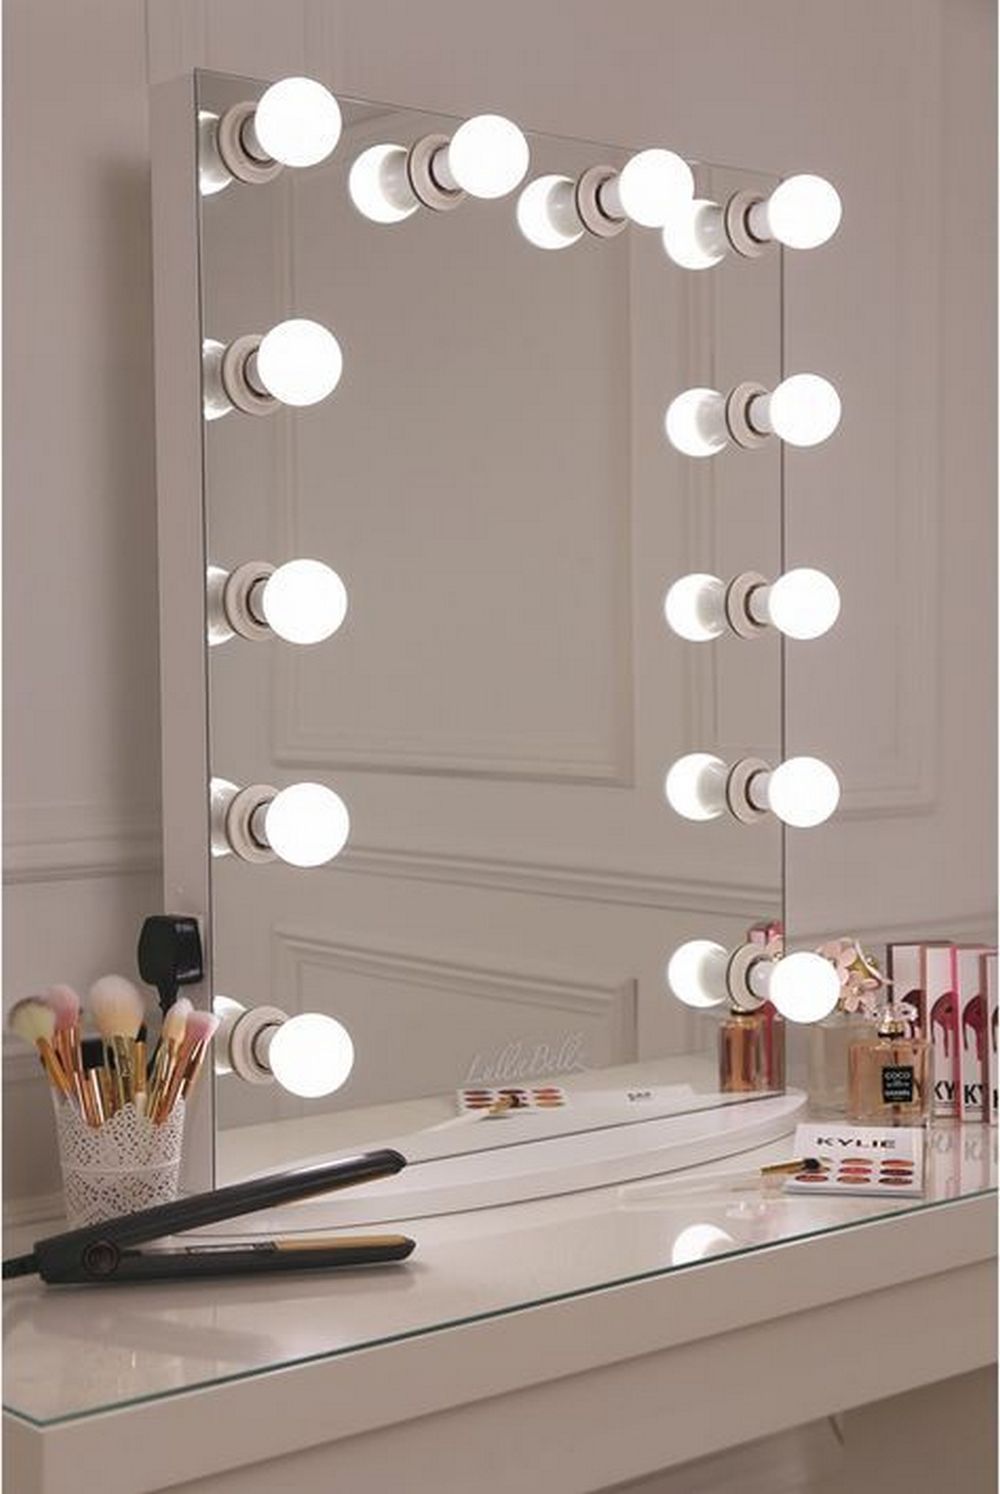 DIY Hollywood Lighted Vanity Mirror – DIY projects for everyone!